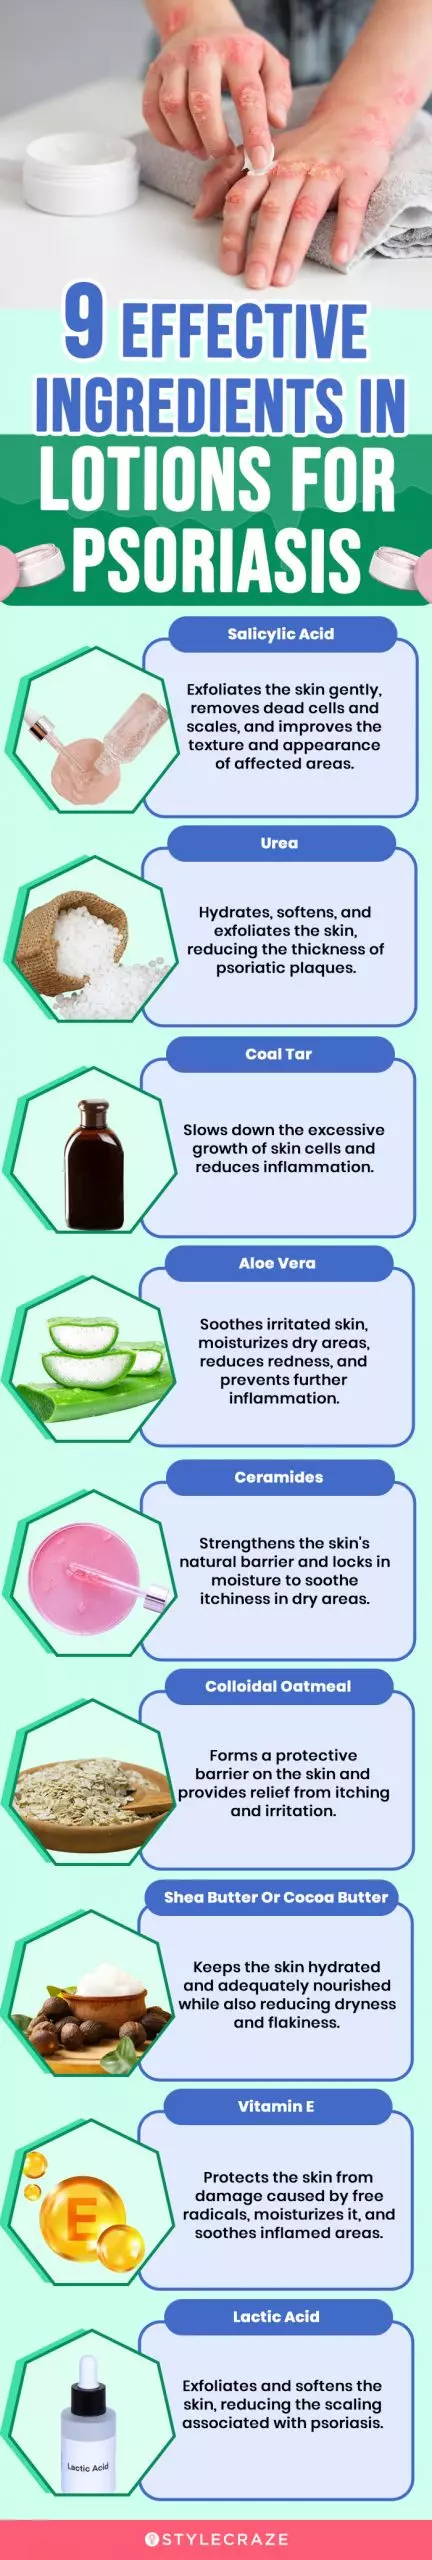 9 Effective Ingredients In Lotions For Psoriasis (infographic)